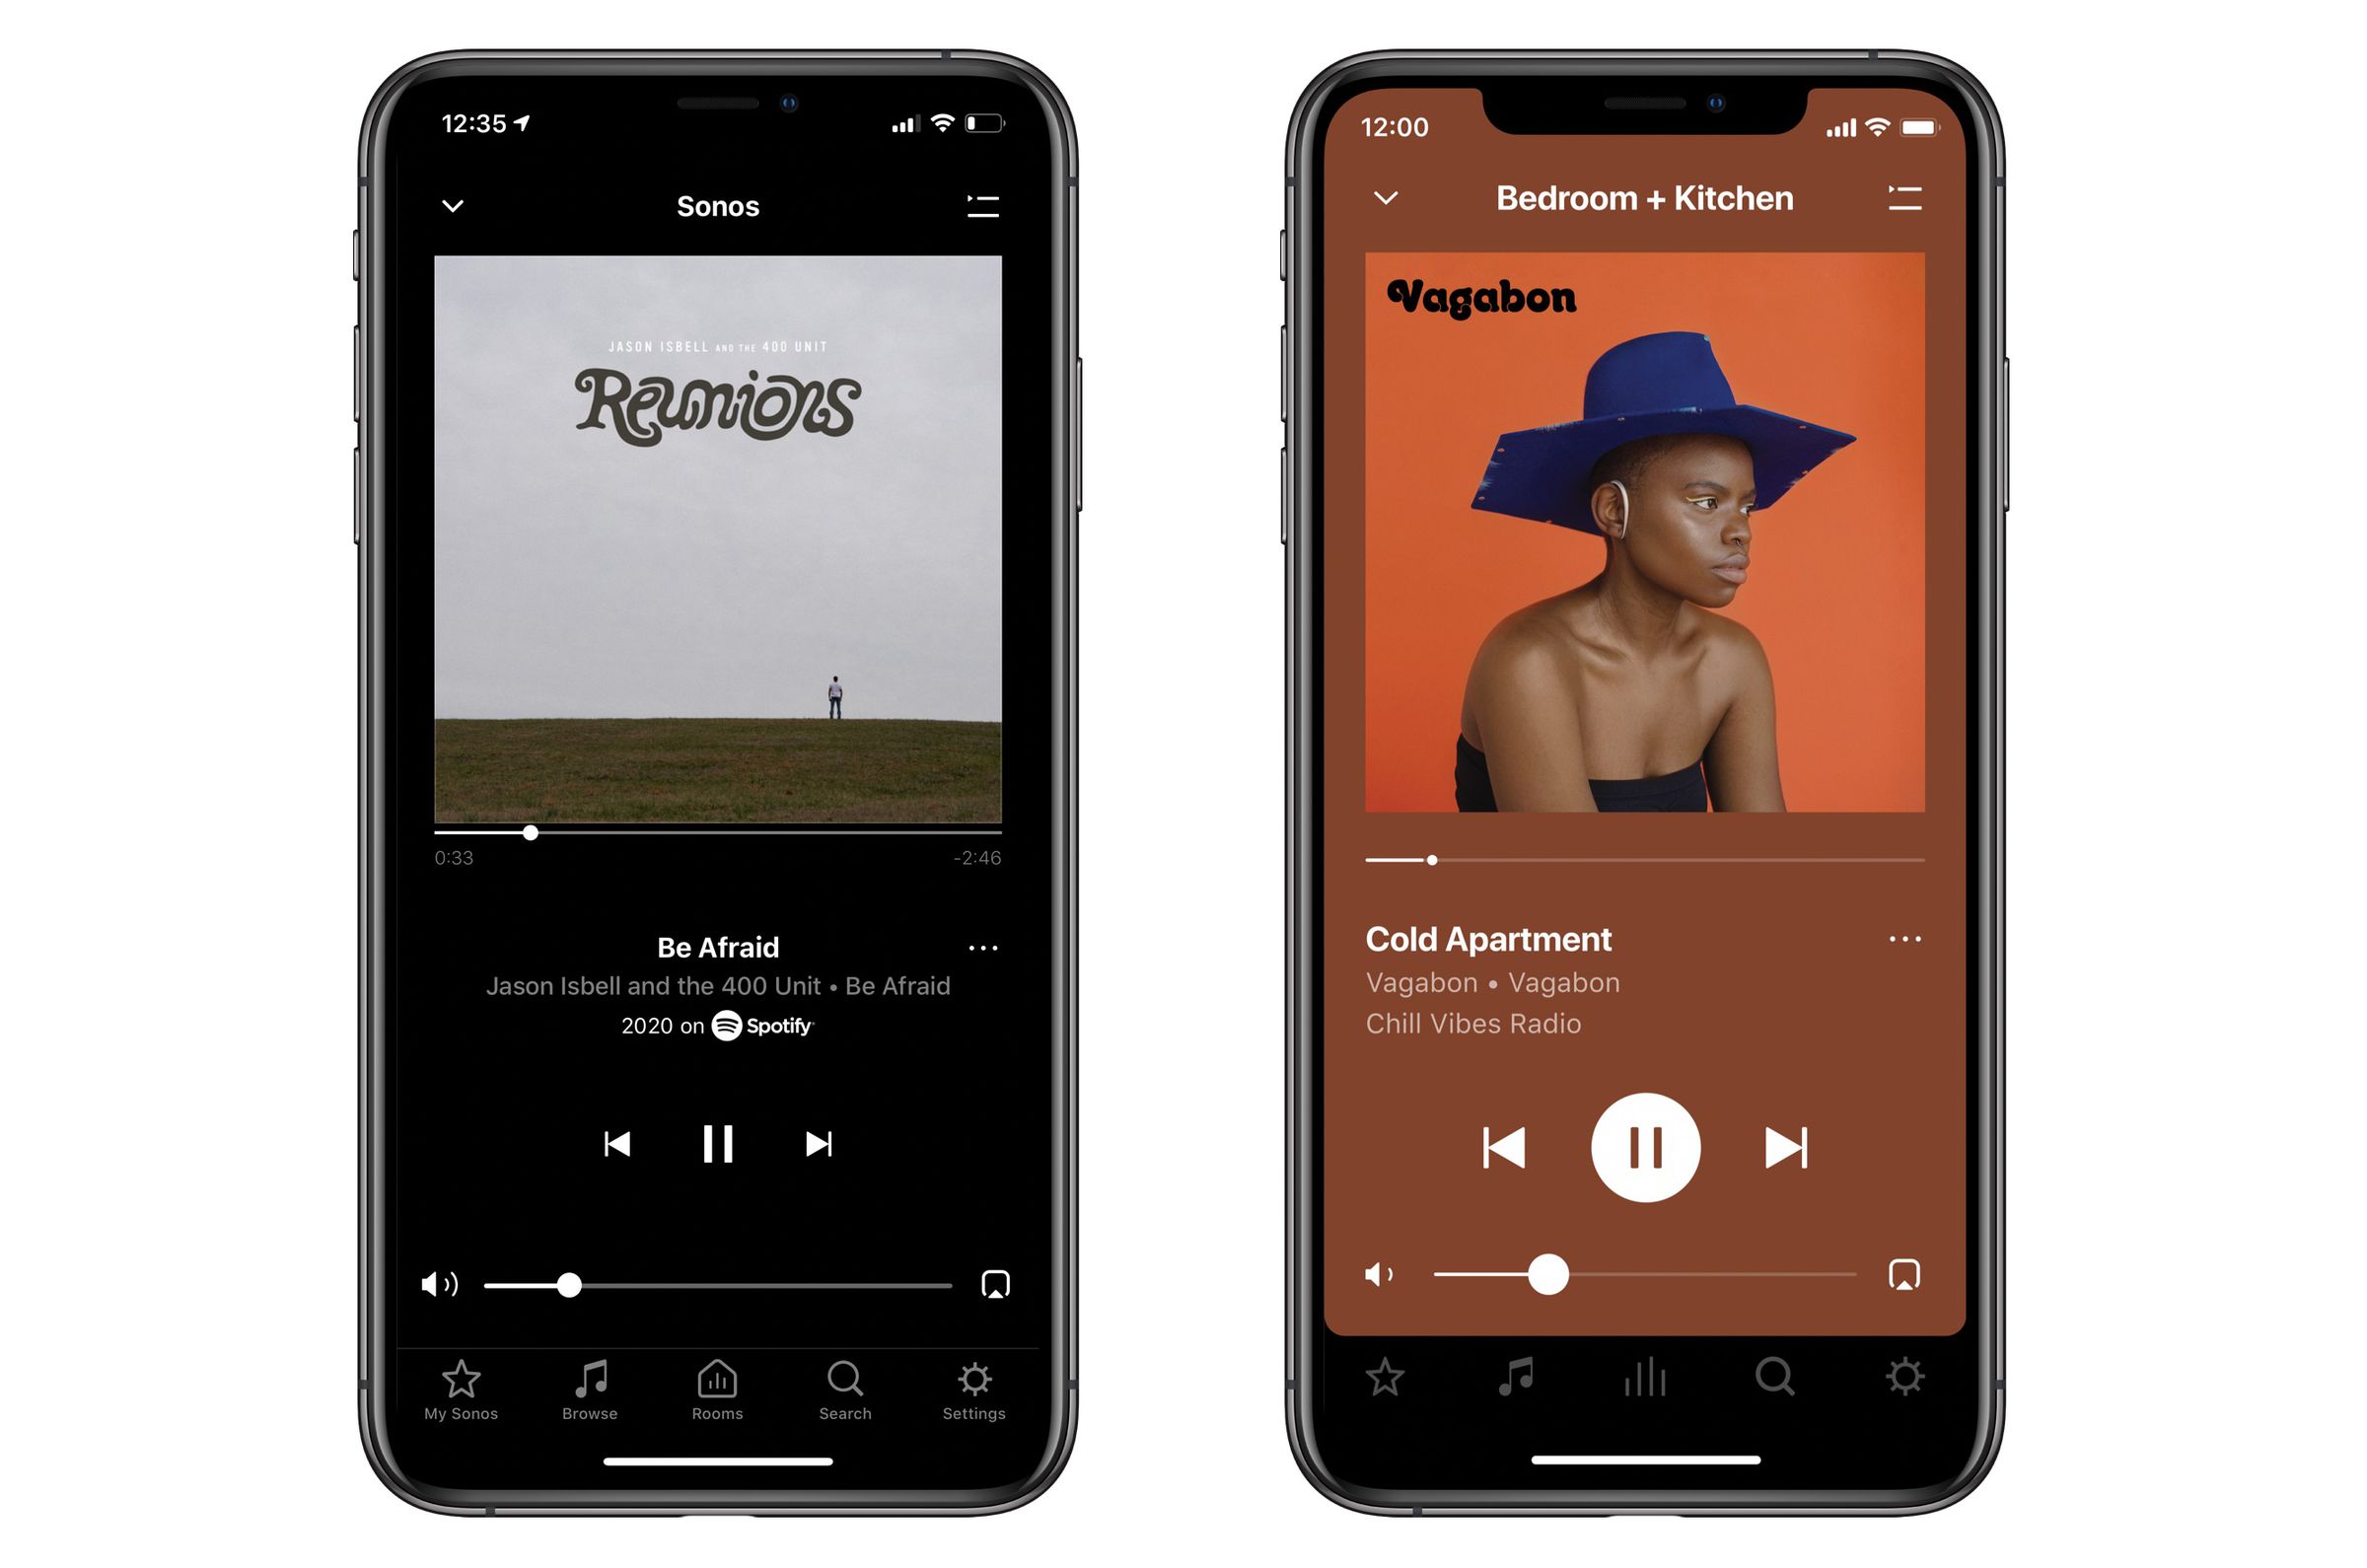 The current Sonos app (left) and upcoming Sonos S2 app (right).